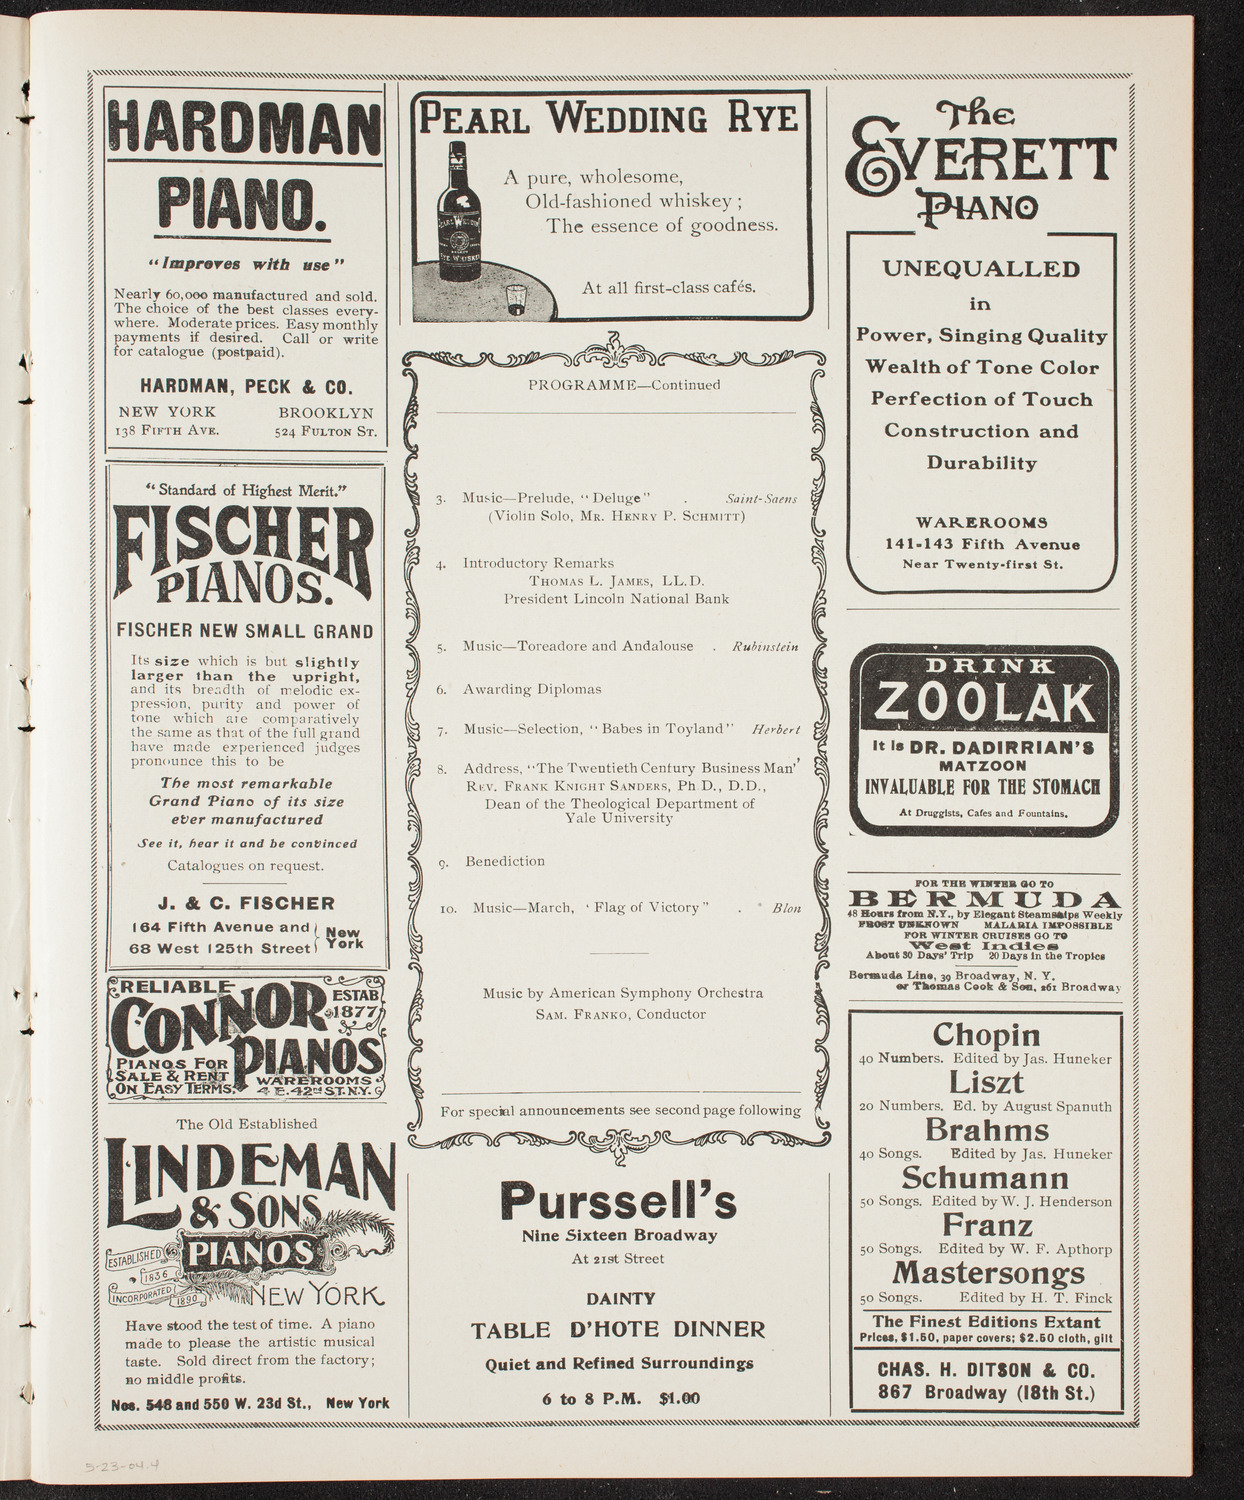 Graduation: Packard Commercial School, May 23, 1904, program page 7